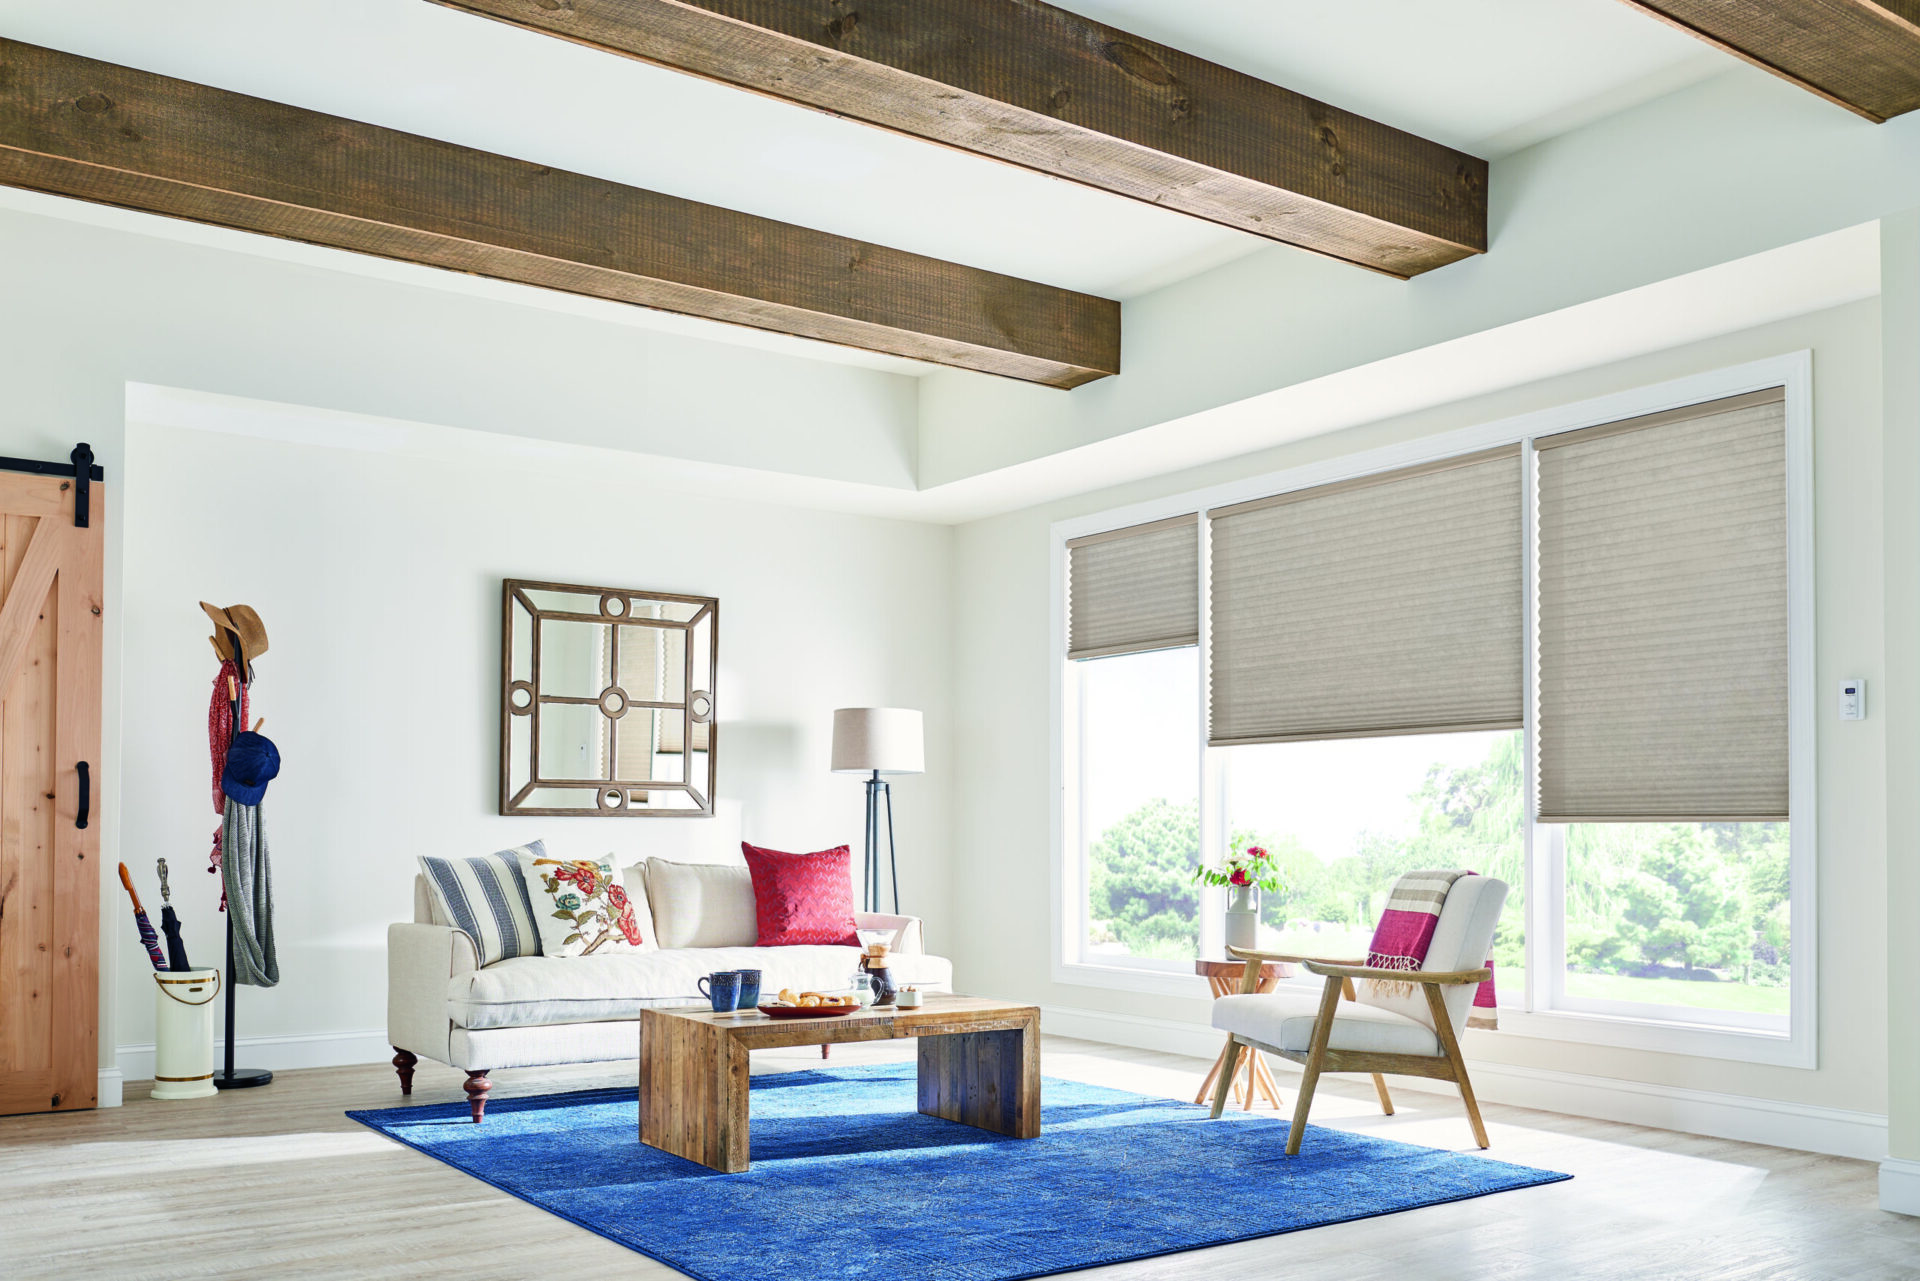 Nashville Window Shades - Graber wood blinds and faux wood blinds - exterior, motorized window treatments in Nashville | Dynamic Delivery Blinds